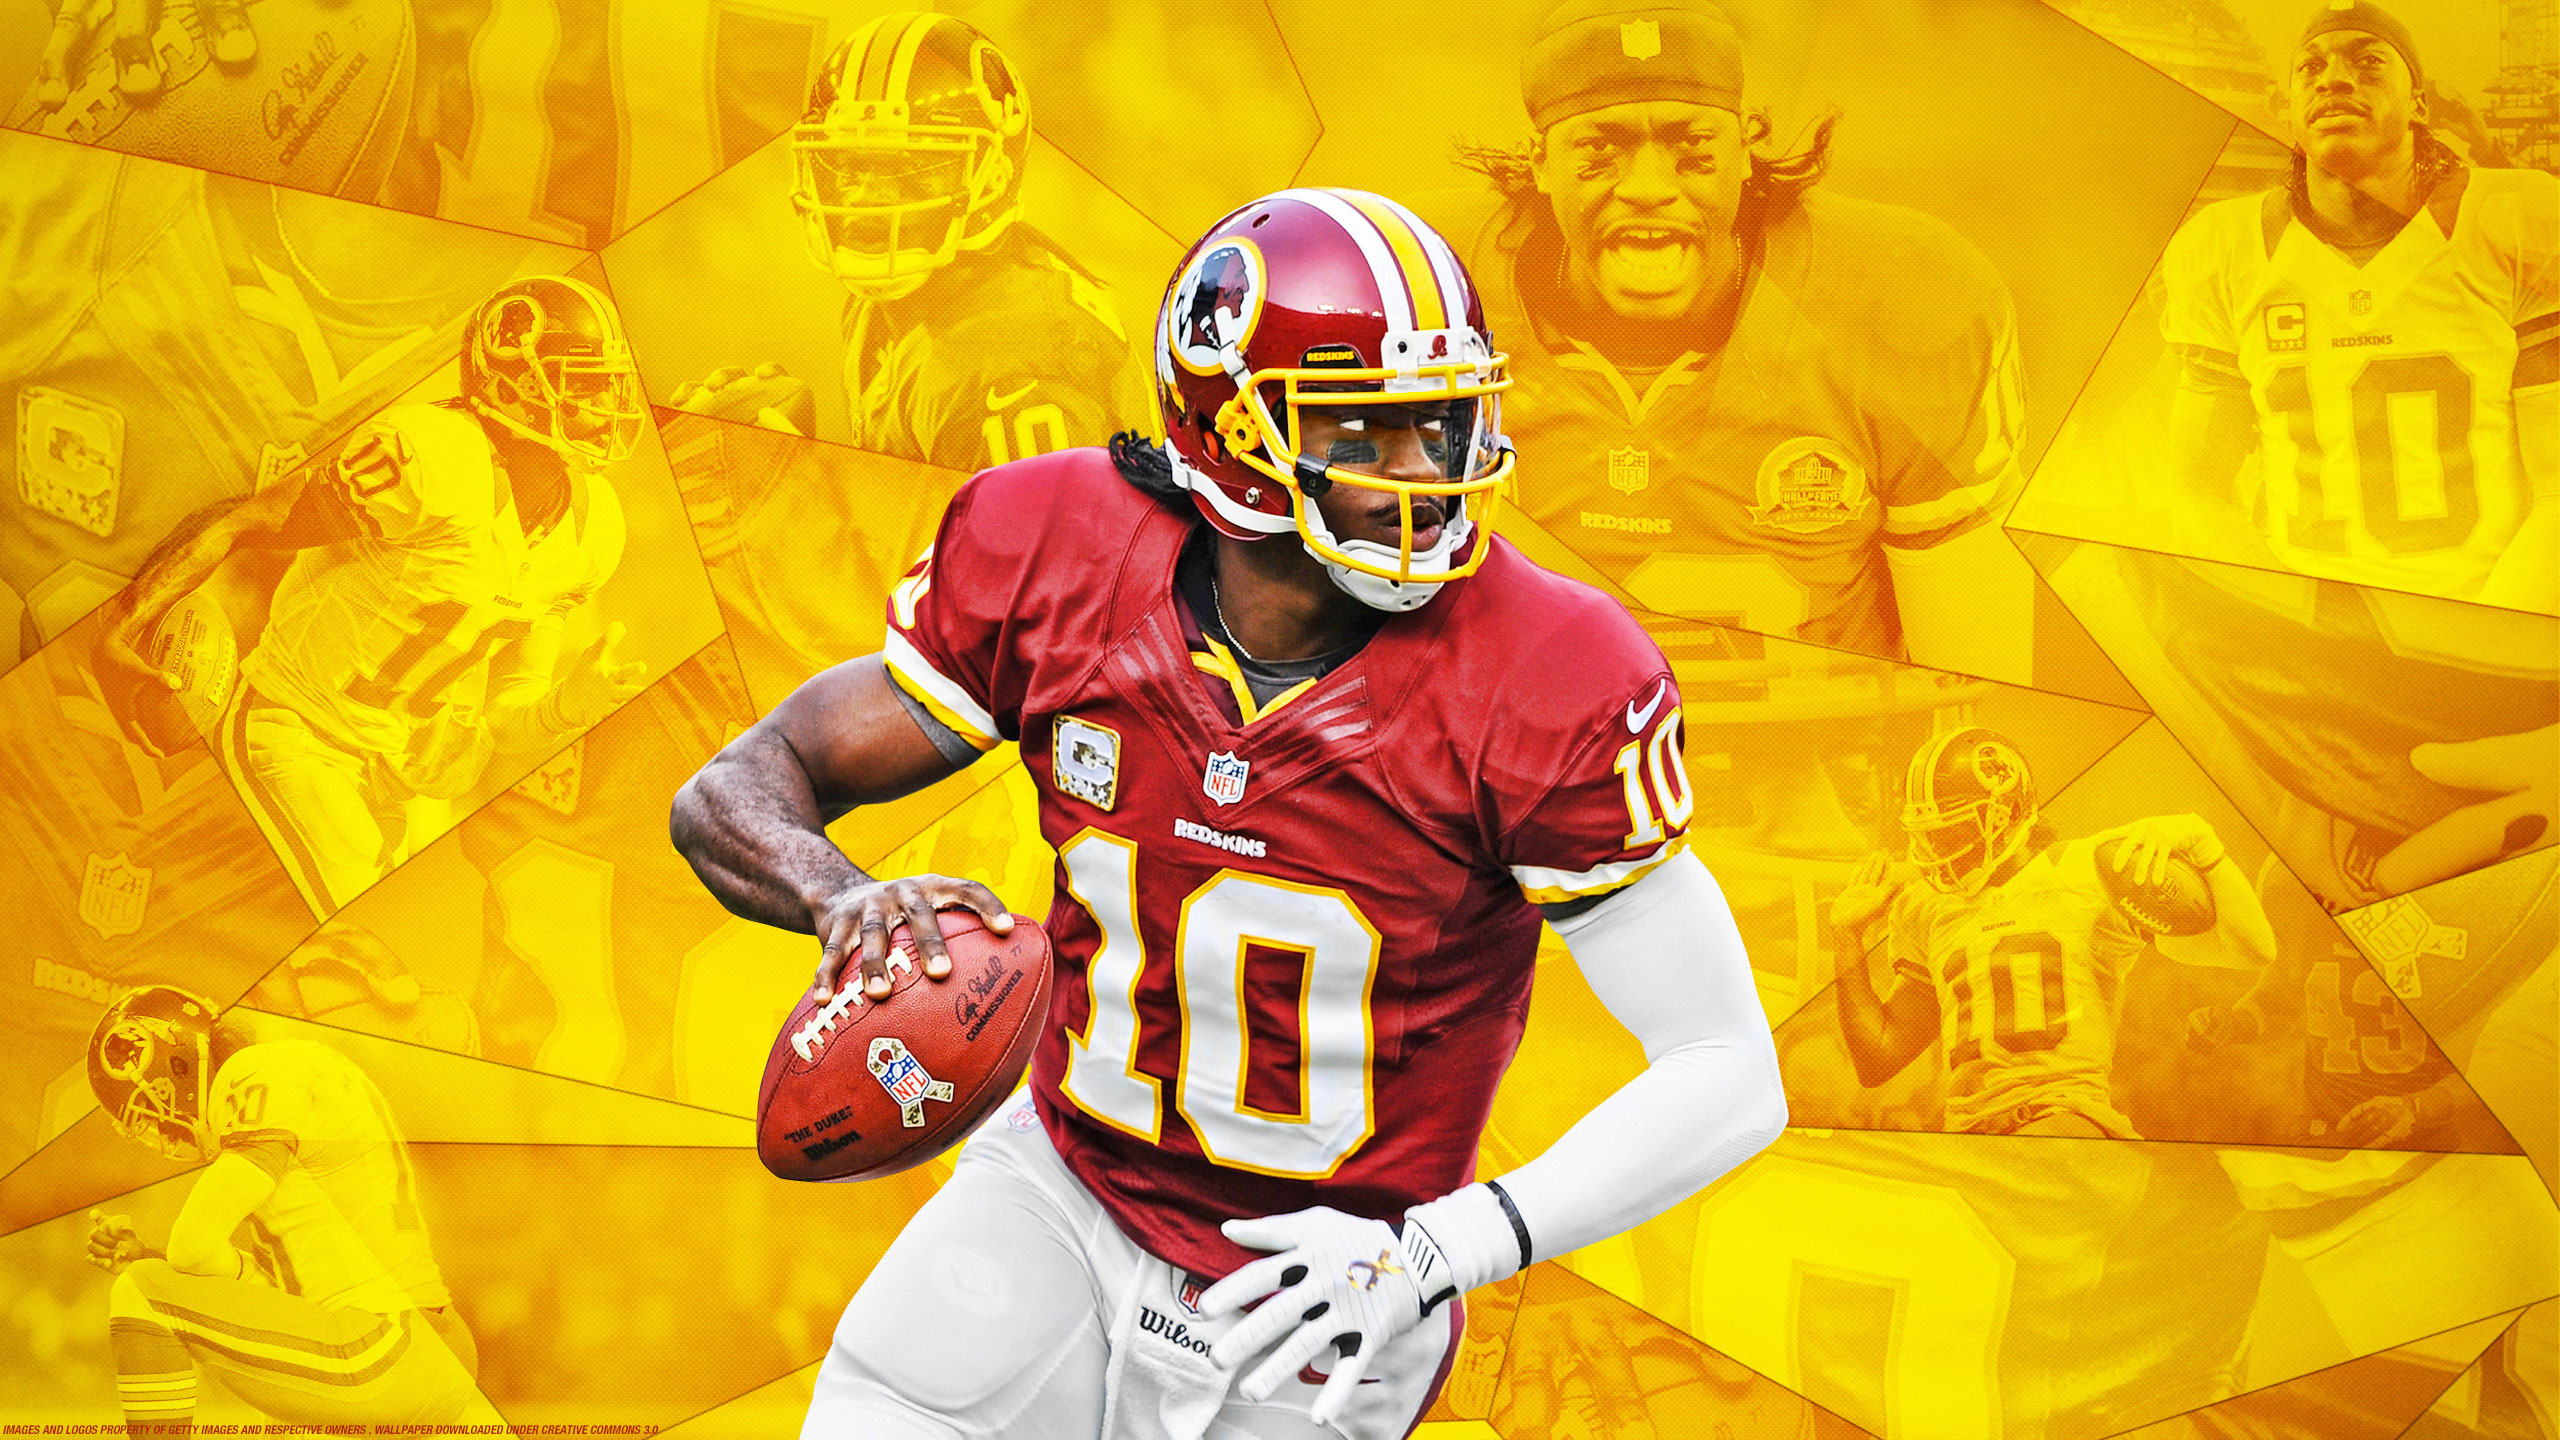 Redskins Robert Griffin Iii Wallpaper In High Resolution At Sports